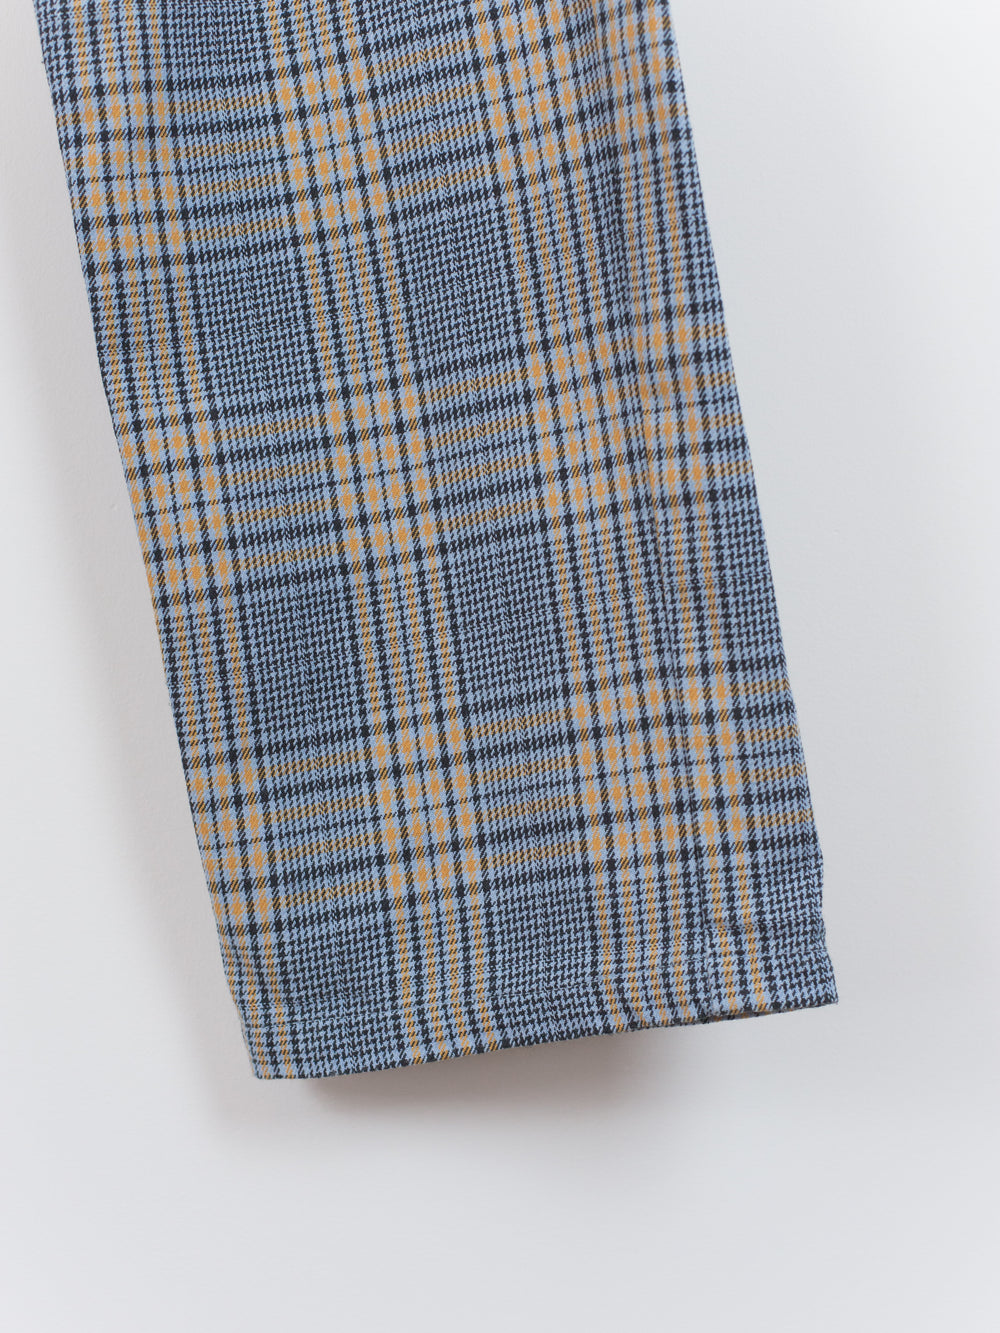 Supreme SS19 Work Pants in Blue Plaid